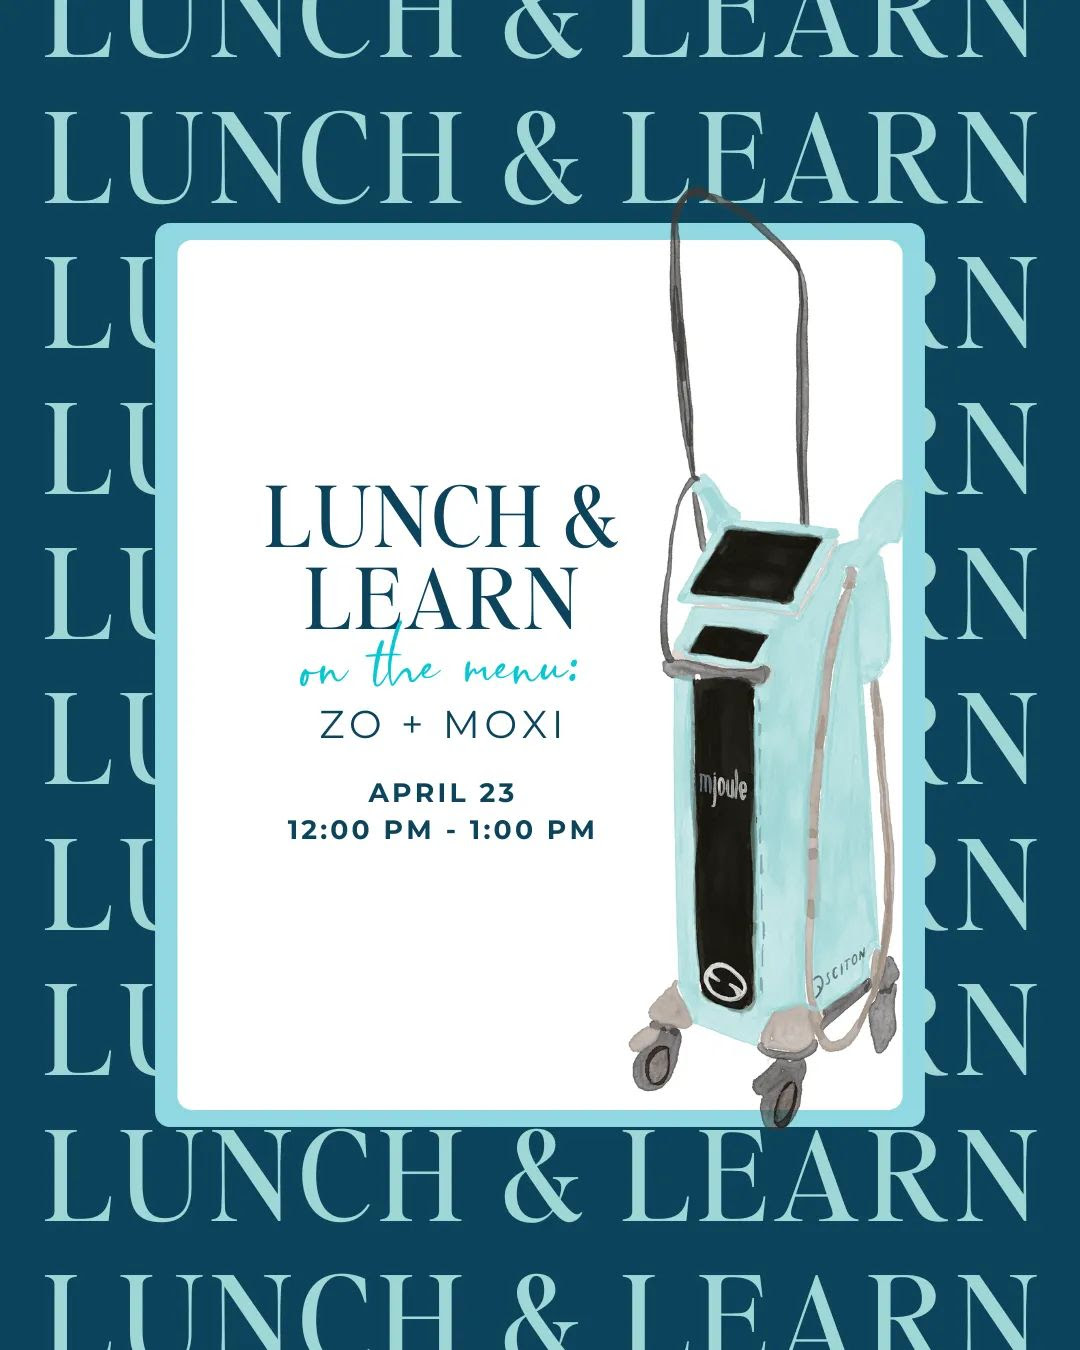 Lunch & Learn @ Lunch & Learn | Amarillo | Texas | United States